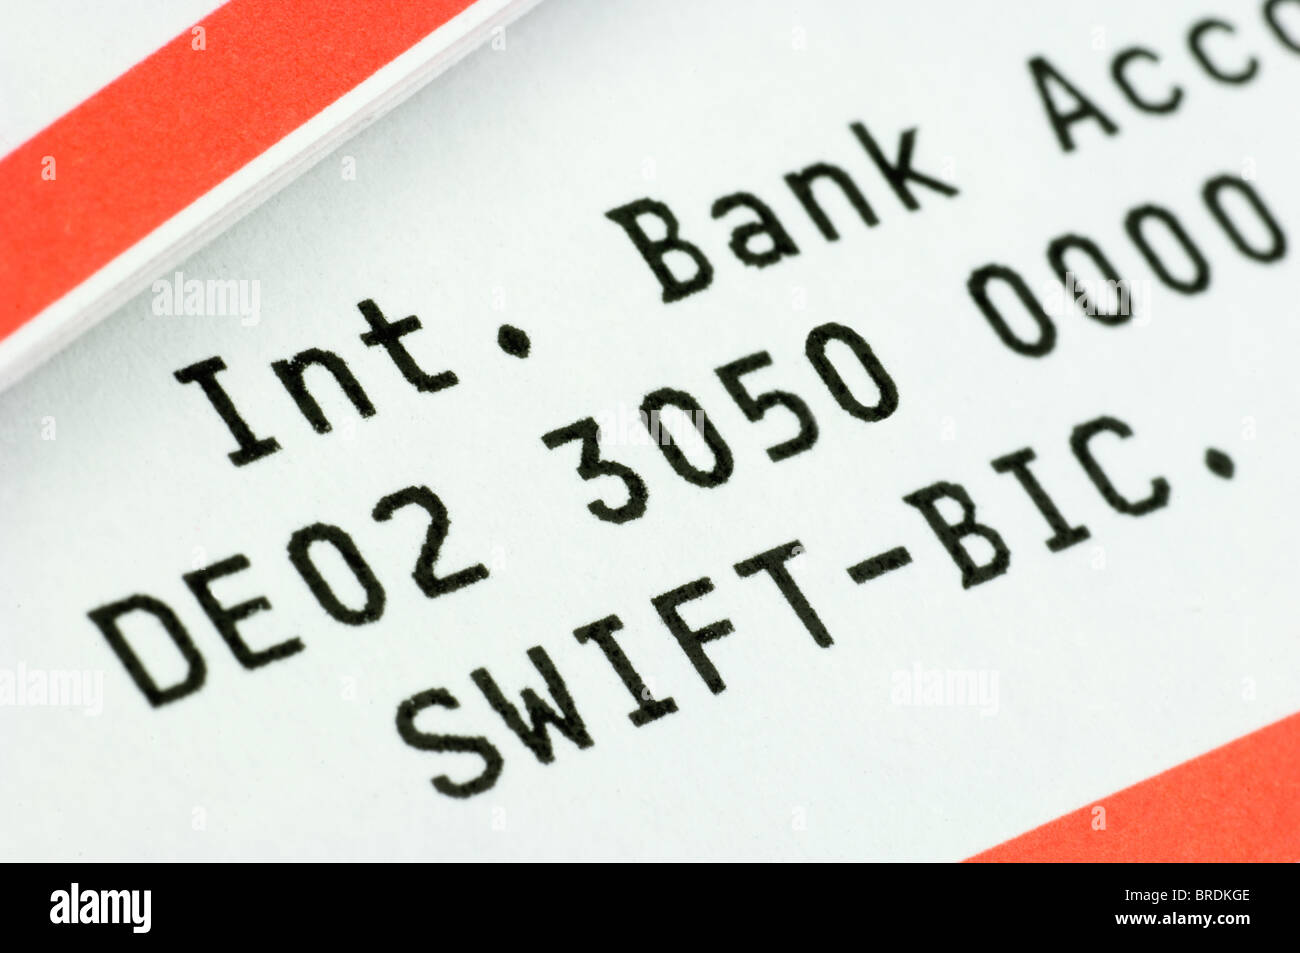 Swift Bic High Resolution Stock Photography and Images - Alamy